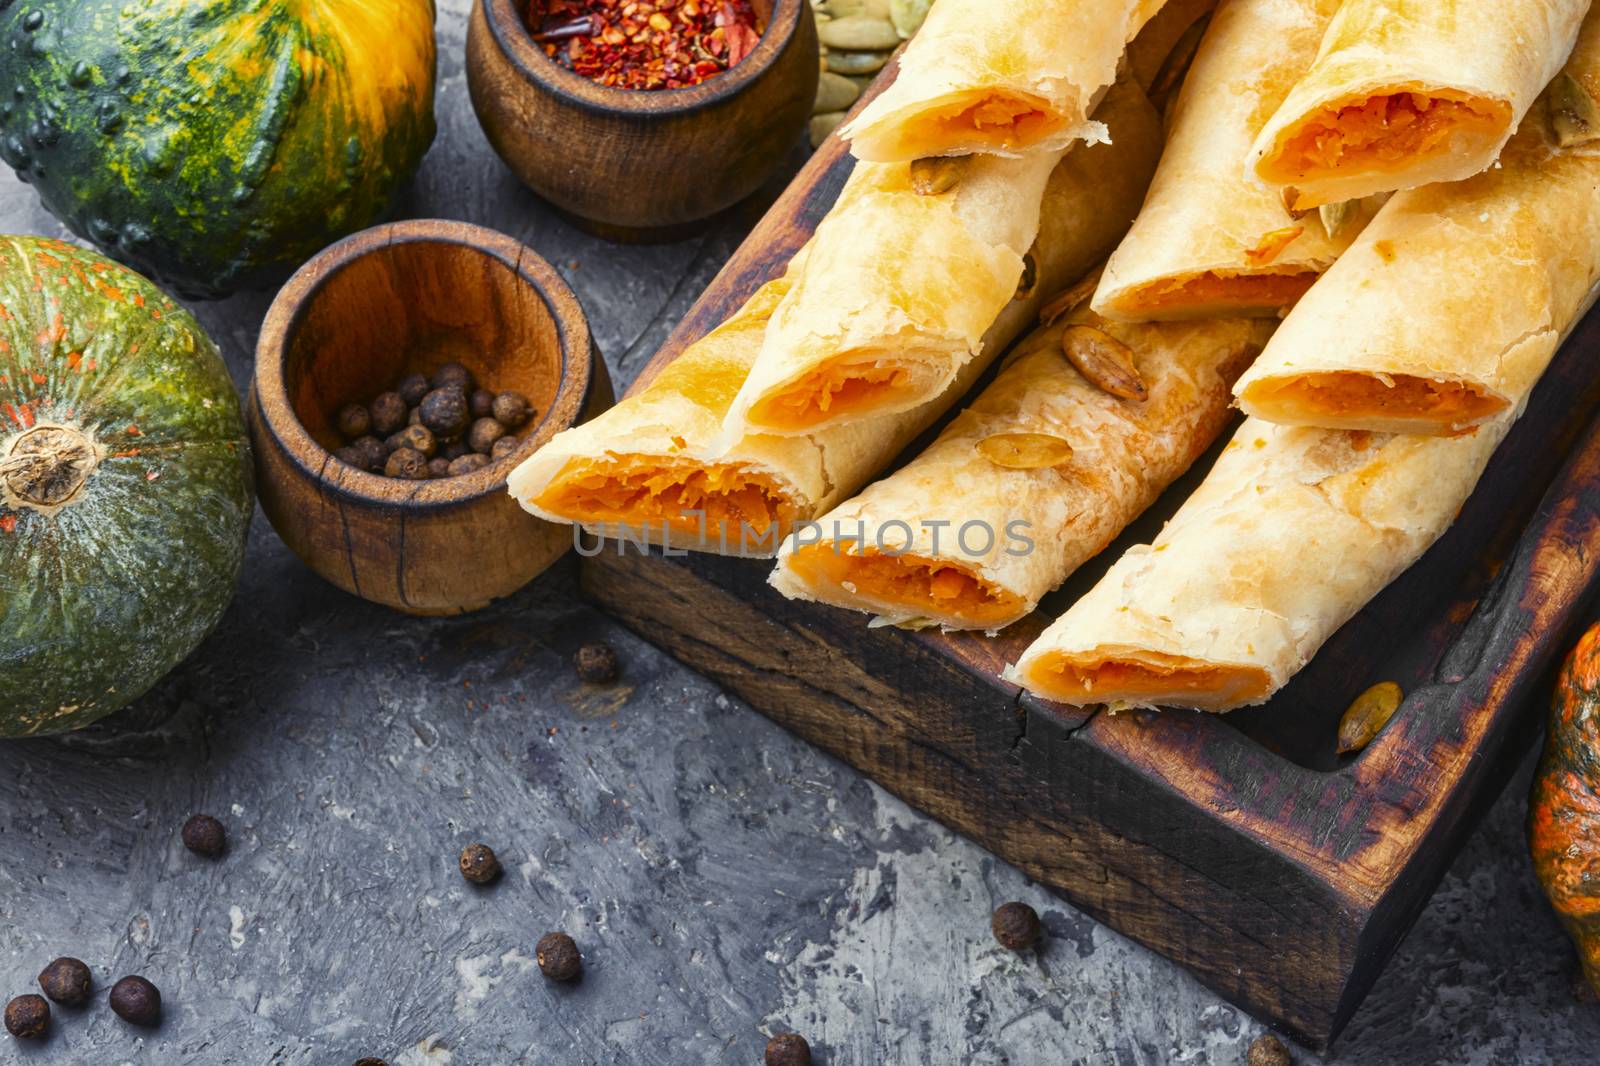 Moldovan pie made of yeast puff pastry.Placinta.Moldavian pastry stuffed with pumpkin